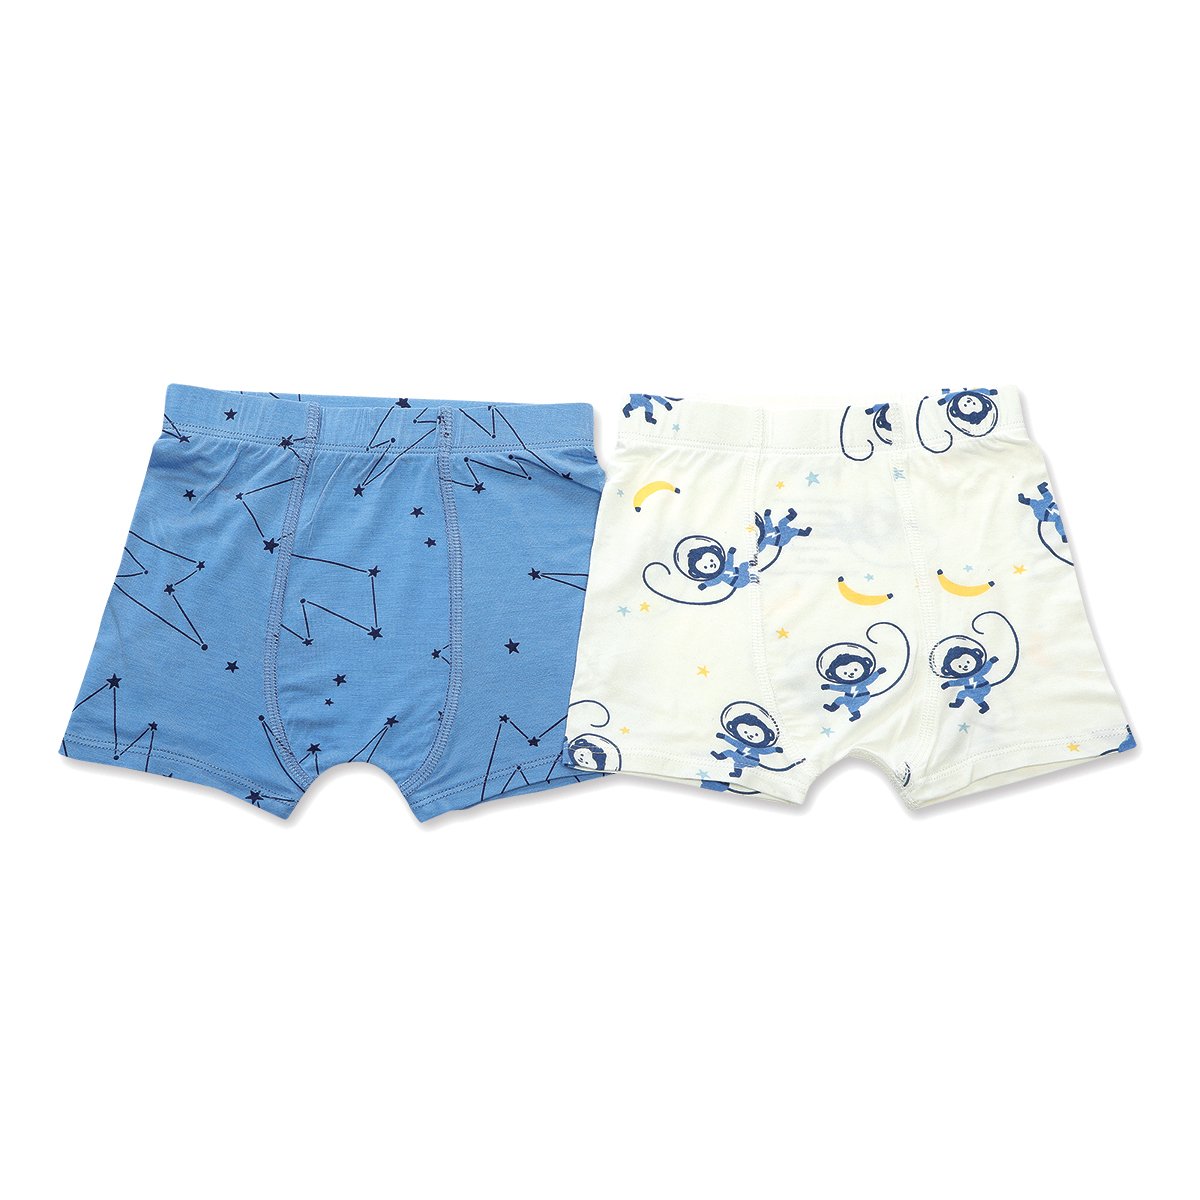 Bamboo Boys Underwear Shorts 2 pack (Light Up the Sky Print/Space